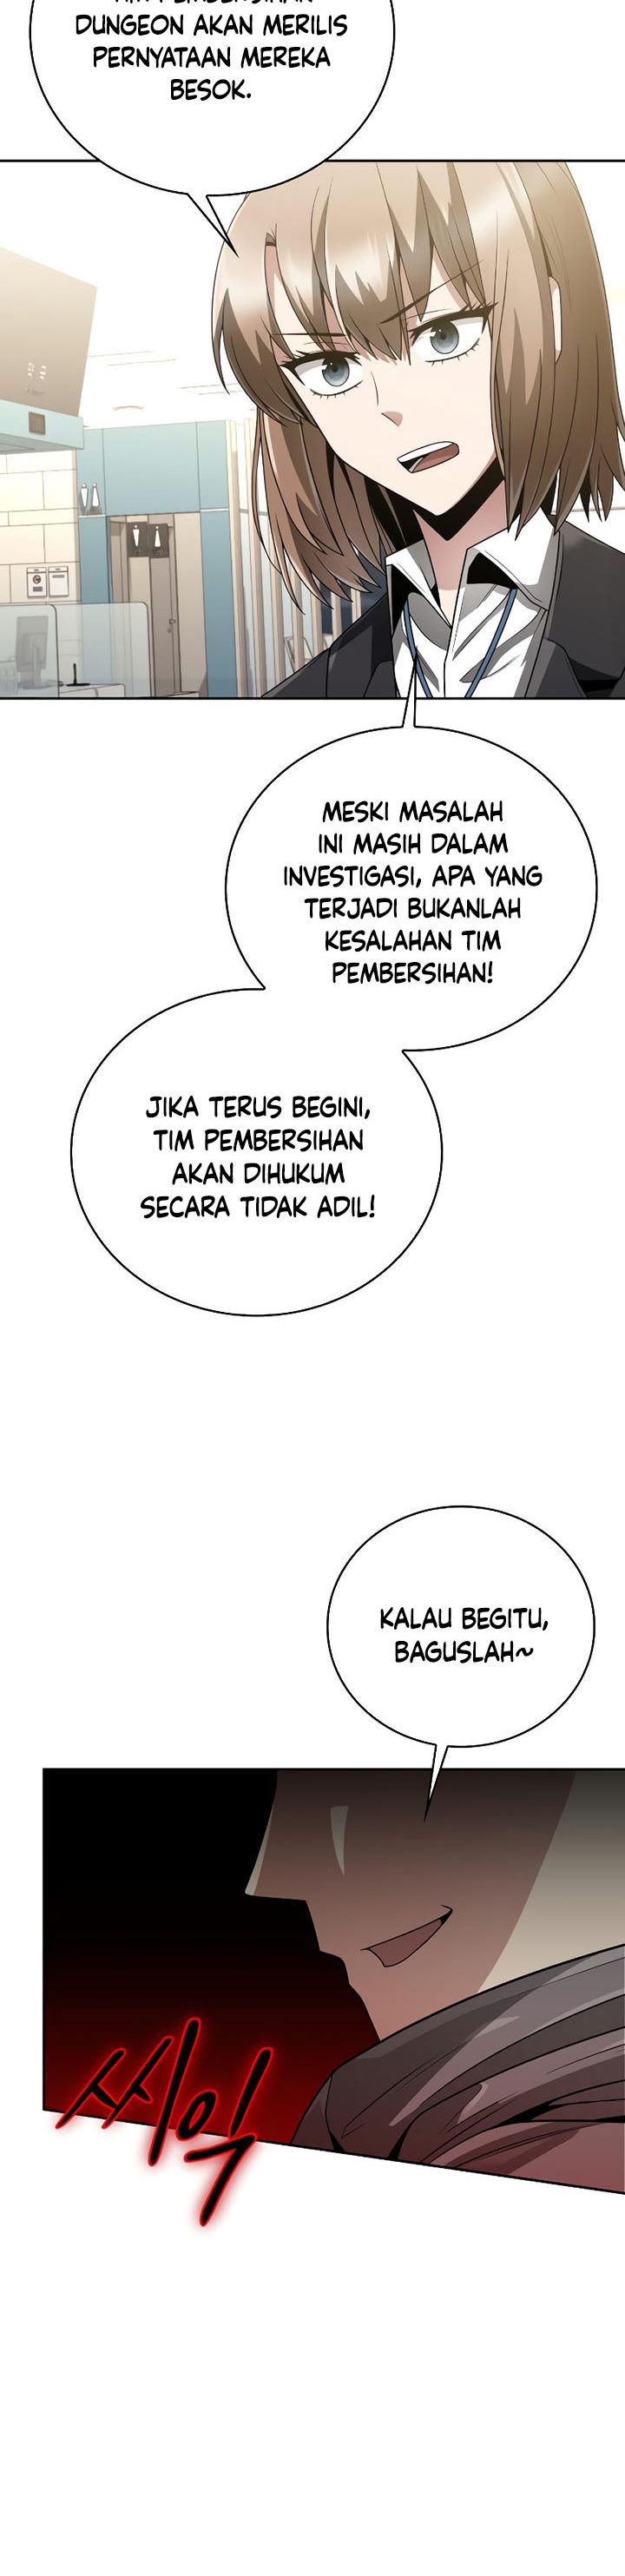 Dilarang COPAS - situs resmi www.mangacanblog.com - Komik clever cleaning life of the returned genius hunter 020 - chapter 20 21 Indonesia clever cleaning life of the returned genius hunter 020 - chapter 20 Terbaru 48|Baca Manga Komik Indonesia|Mangacan